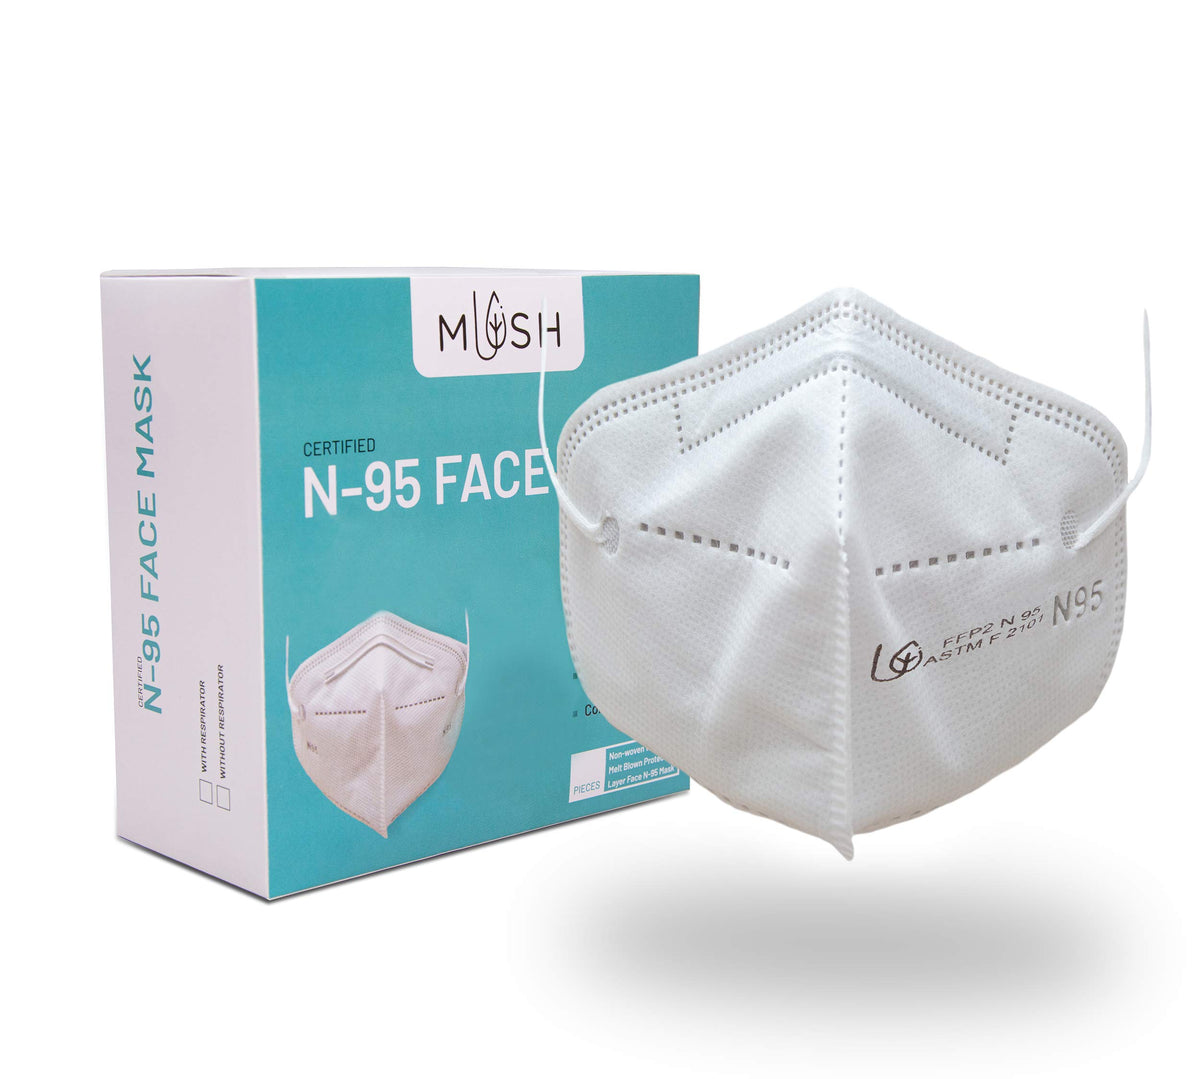 Mush Non-Woven Fabric Reuseable N95 Face Mask (White, Without Valve, Pack of 6) for Men & Women - CE, ISO, FDA Certified and NABL, SITRA lab tested